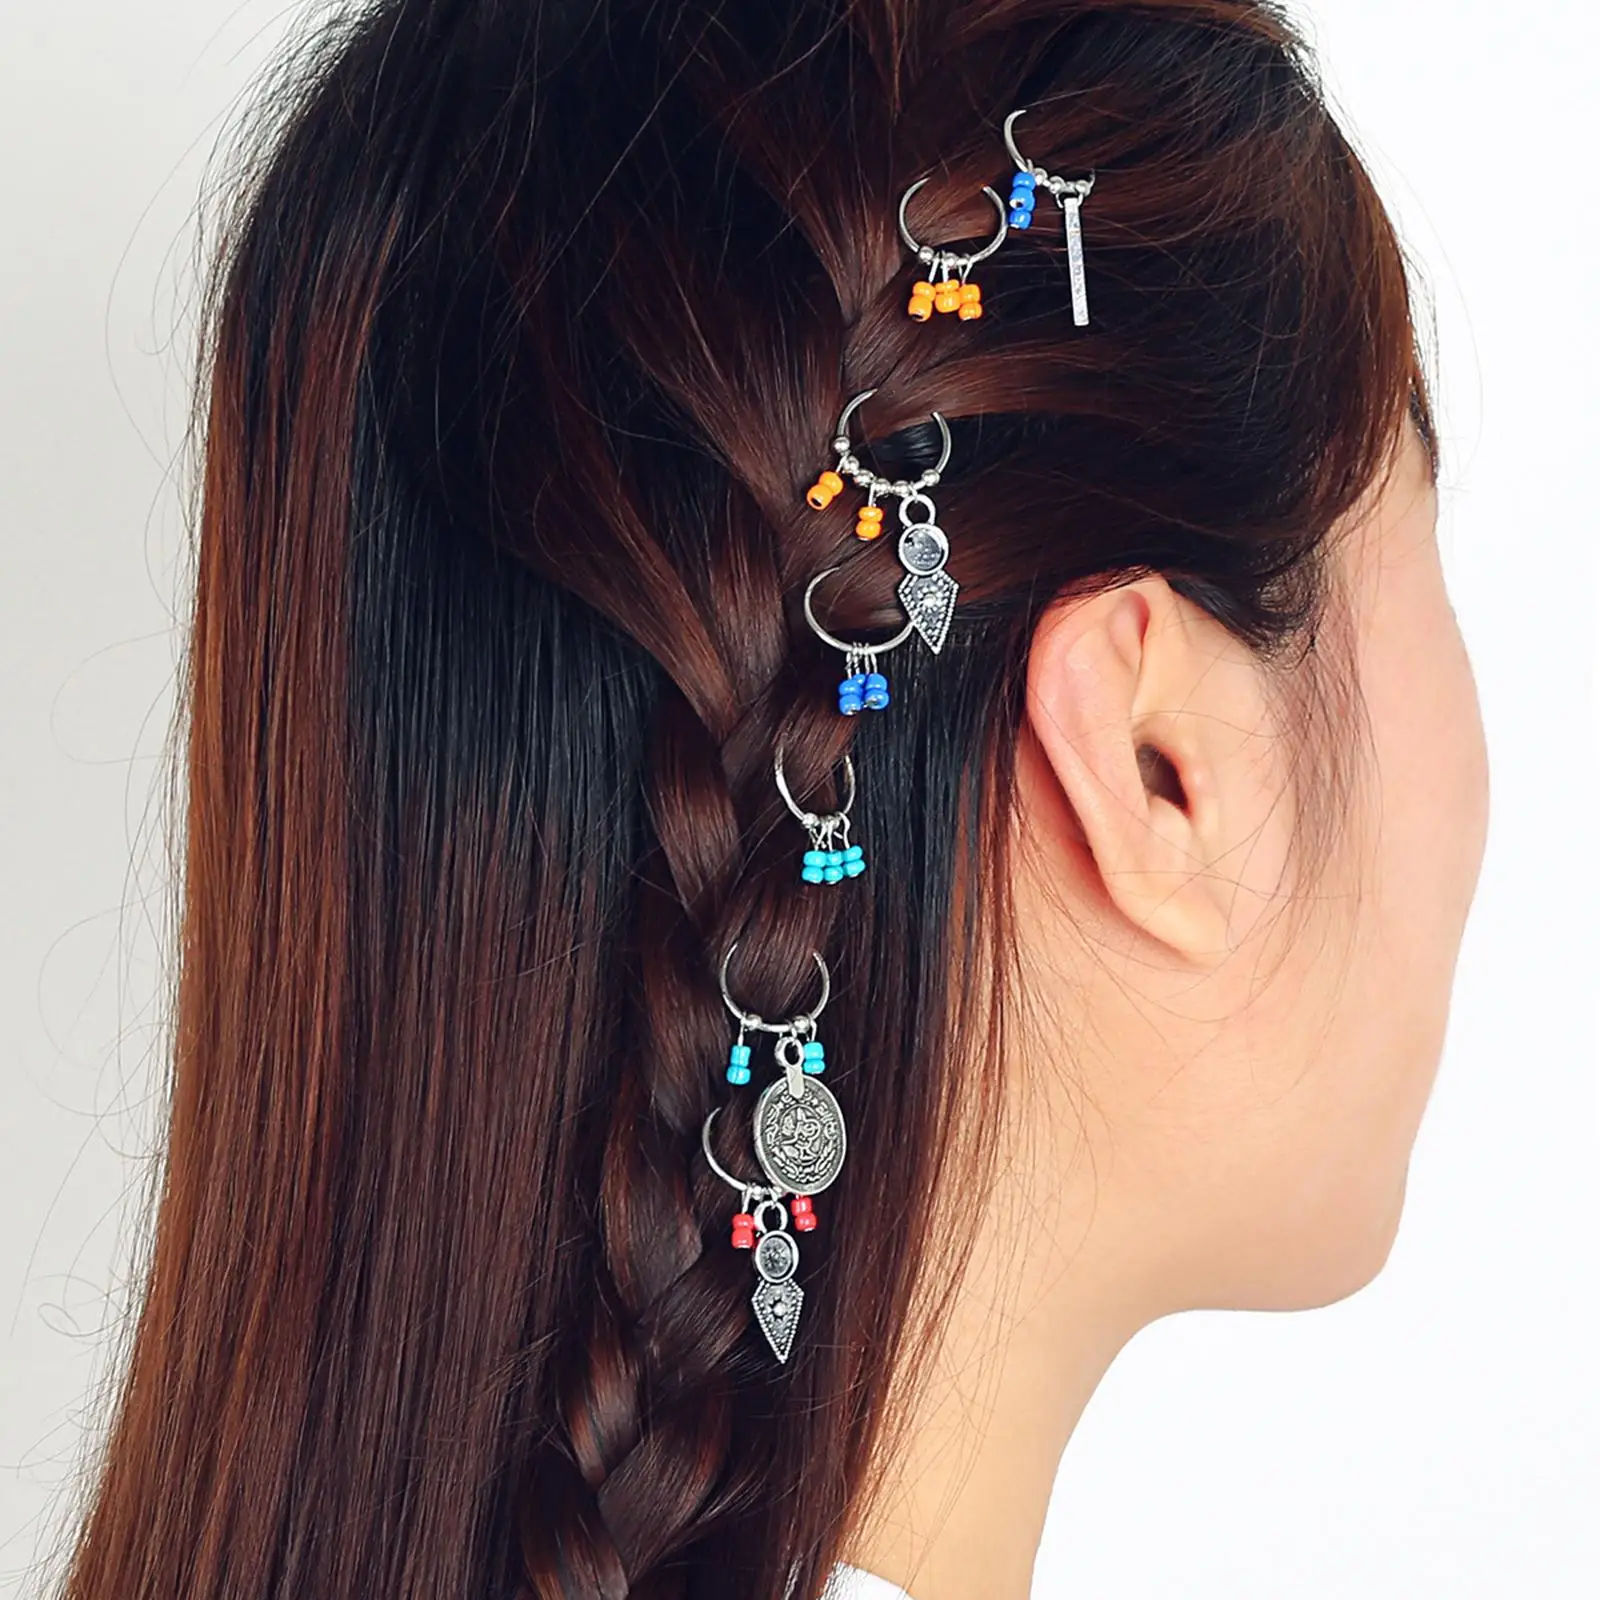 7 Pieces Fashion Hair Braid Ring Boho Adjustable Chic Alloy Beads Pendants Clips for Festivals Party Halloween Women Girls